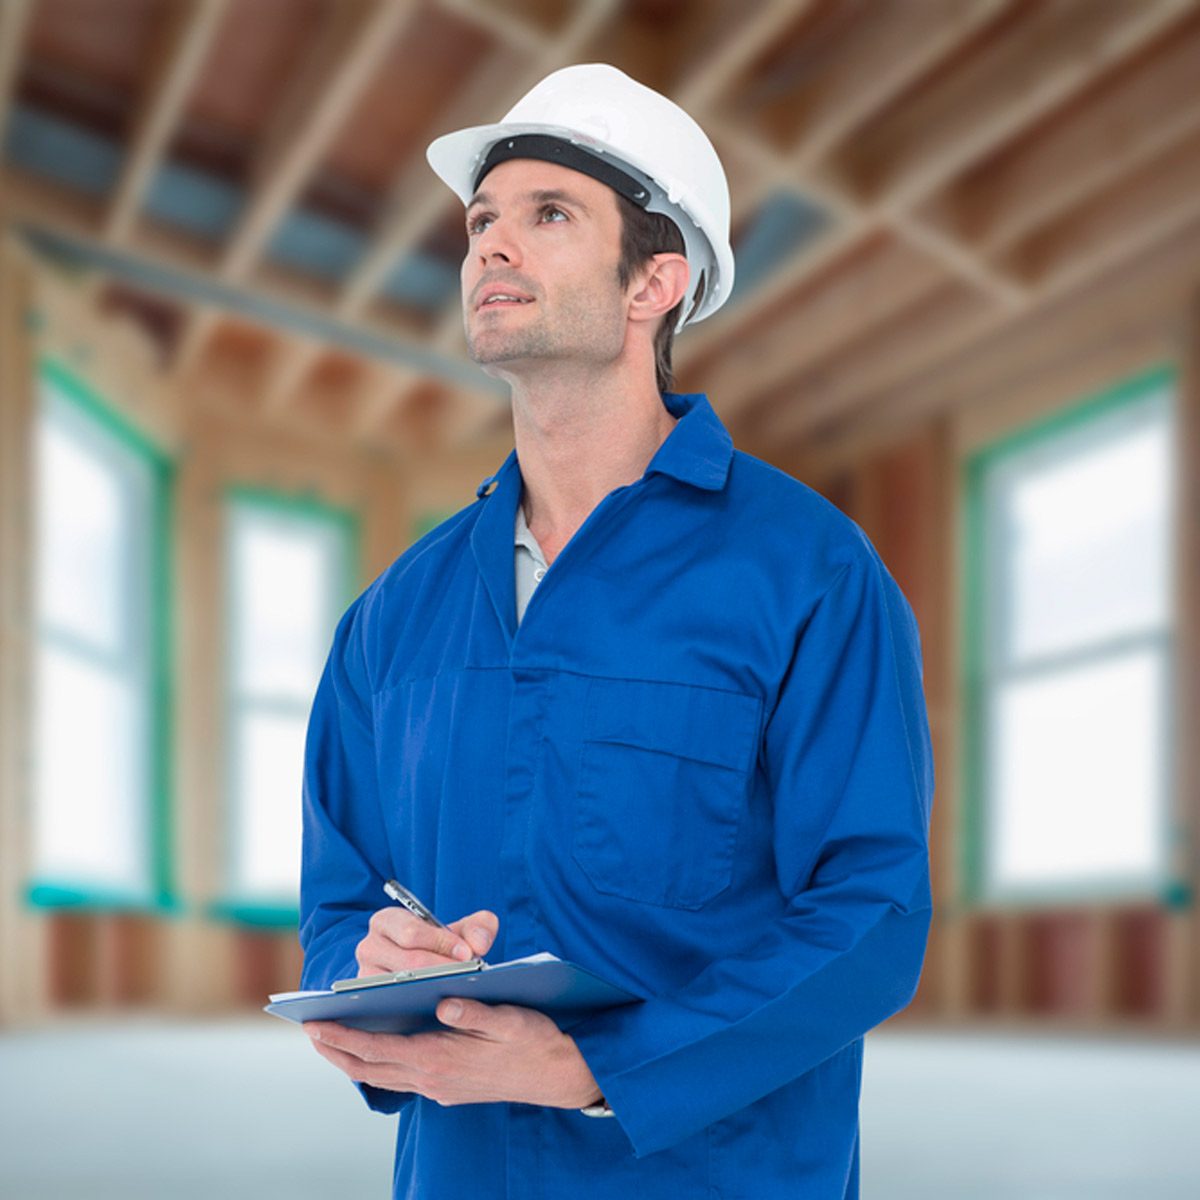 How To Make Structural Repairs By Sistering Floor Joists